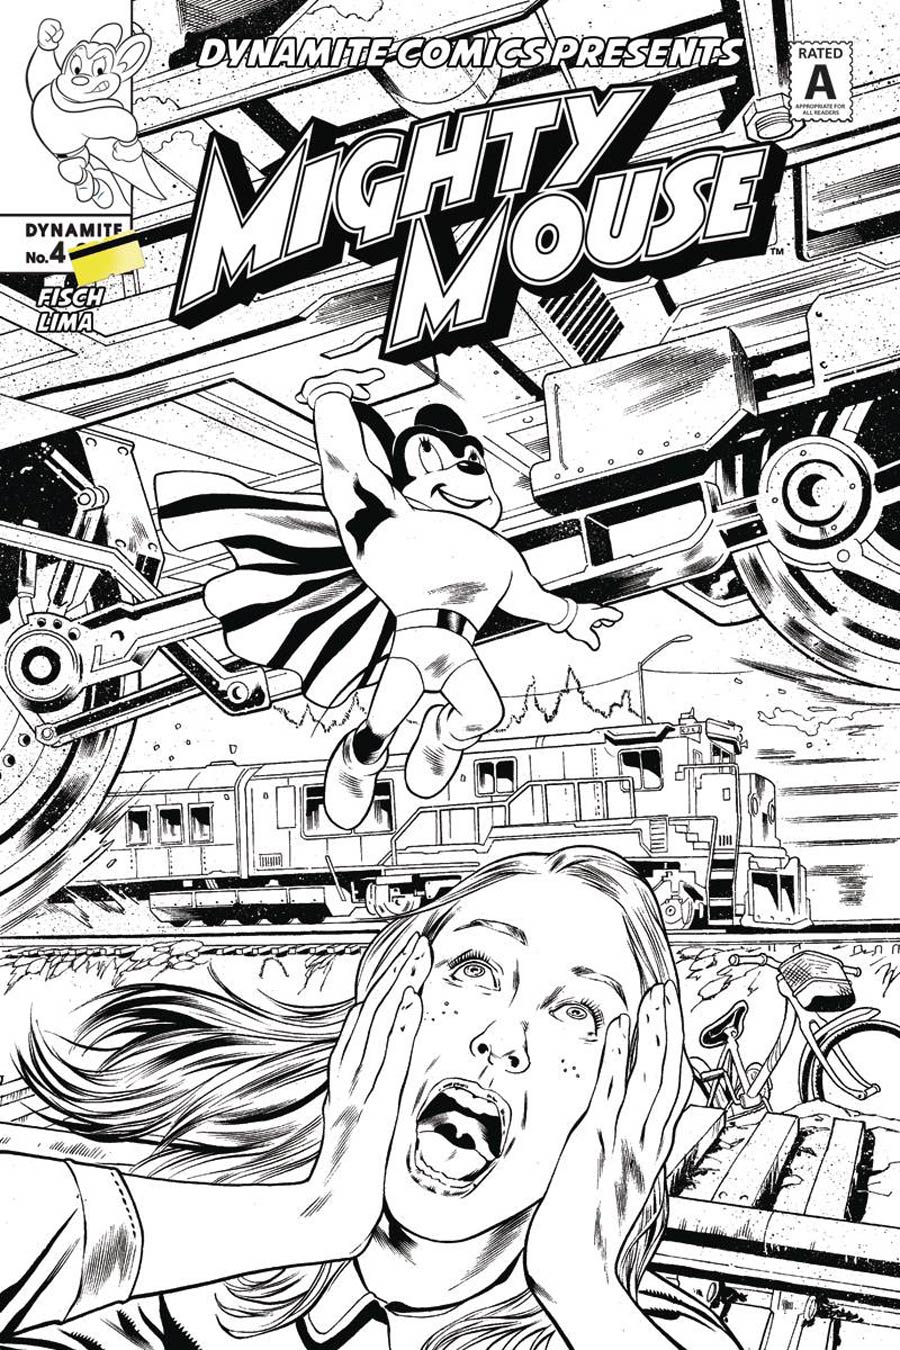 Mighty Mouse Vol 5 #4 Cover C Incentive Igor Lima Black & White Cover